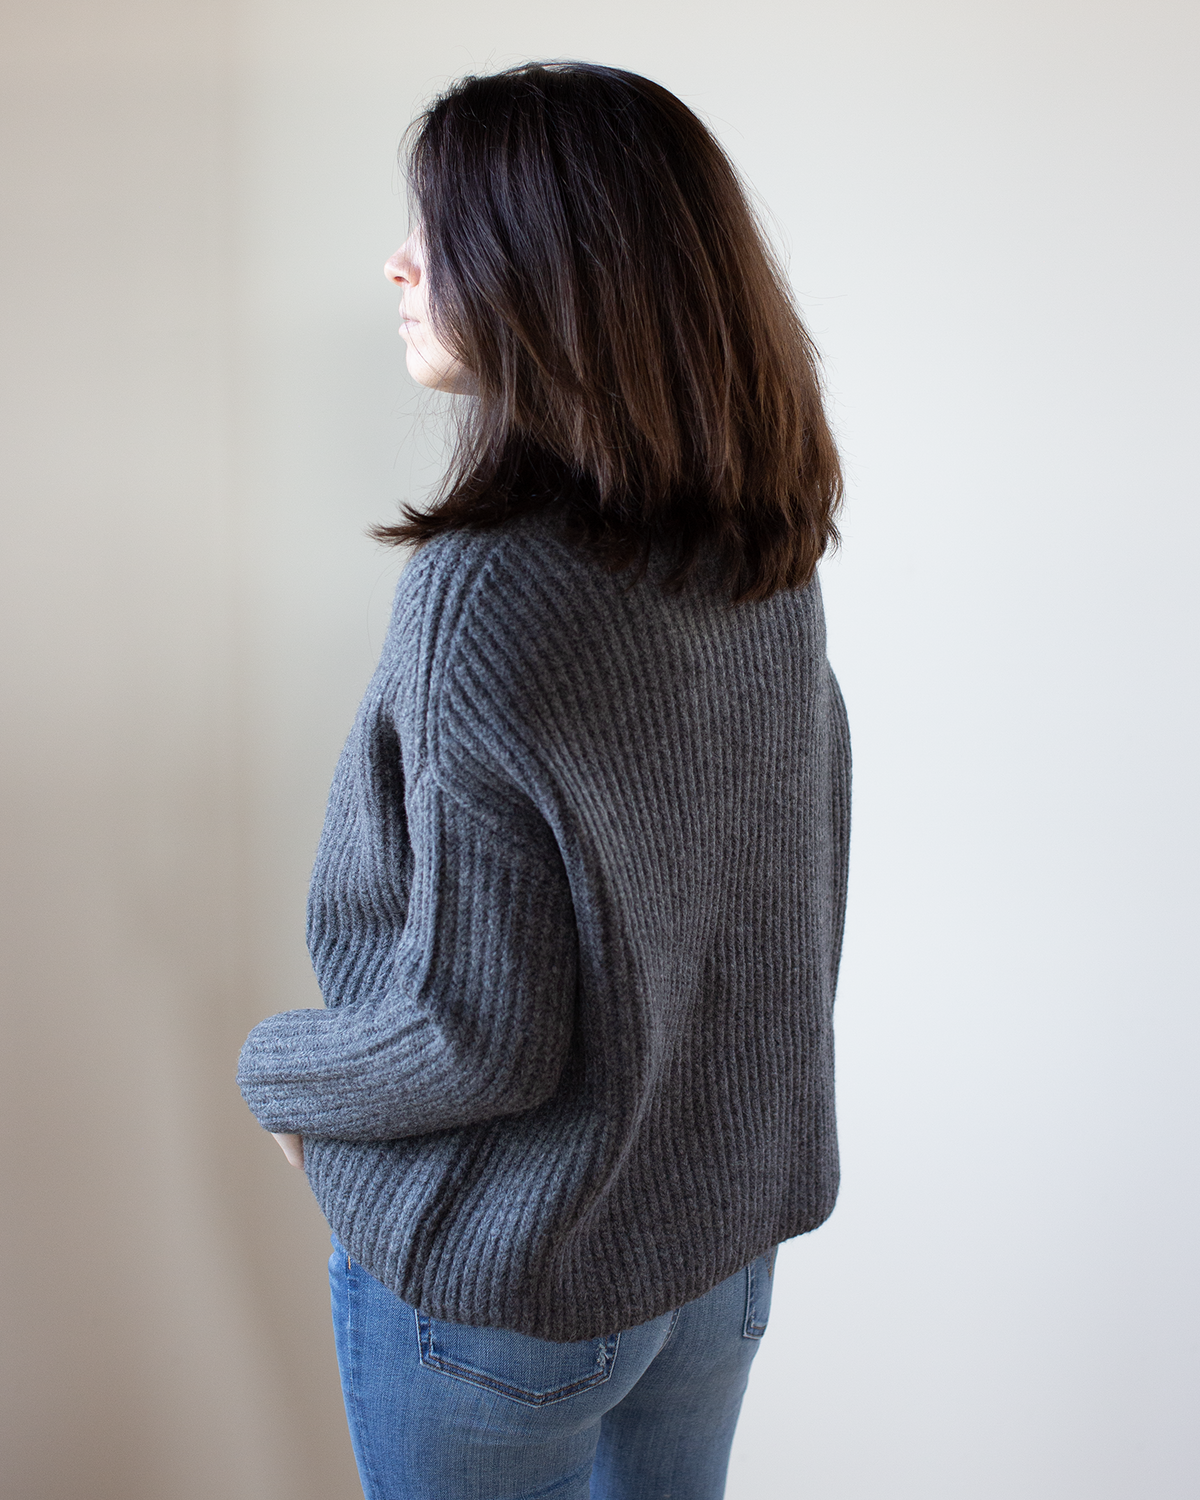 Margot High Neck Sweater in Charcoal Heather